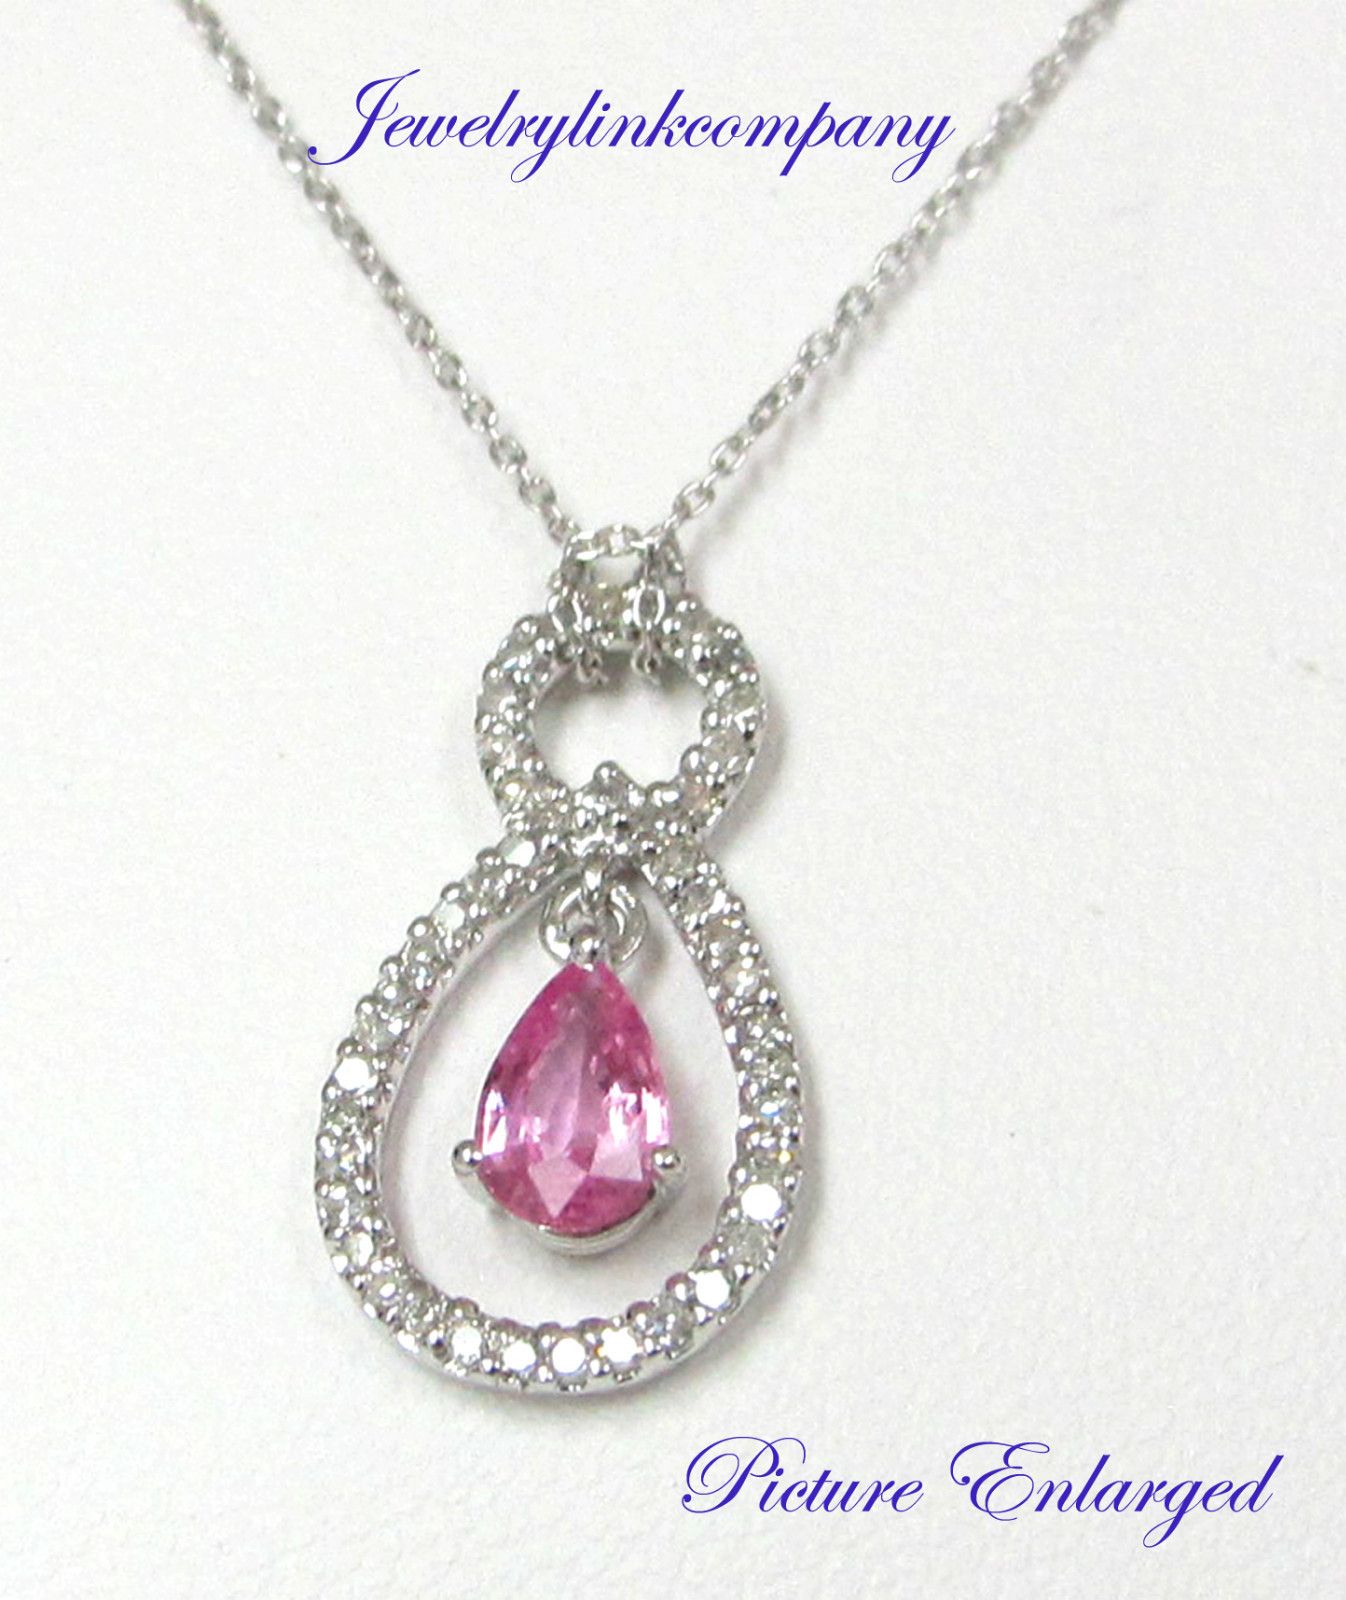 14k White Gold Diamonds Necklace with Pink Sapphire Total Gem Weight 0